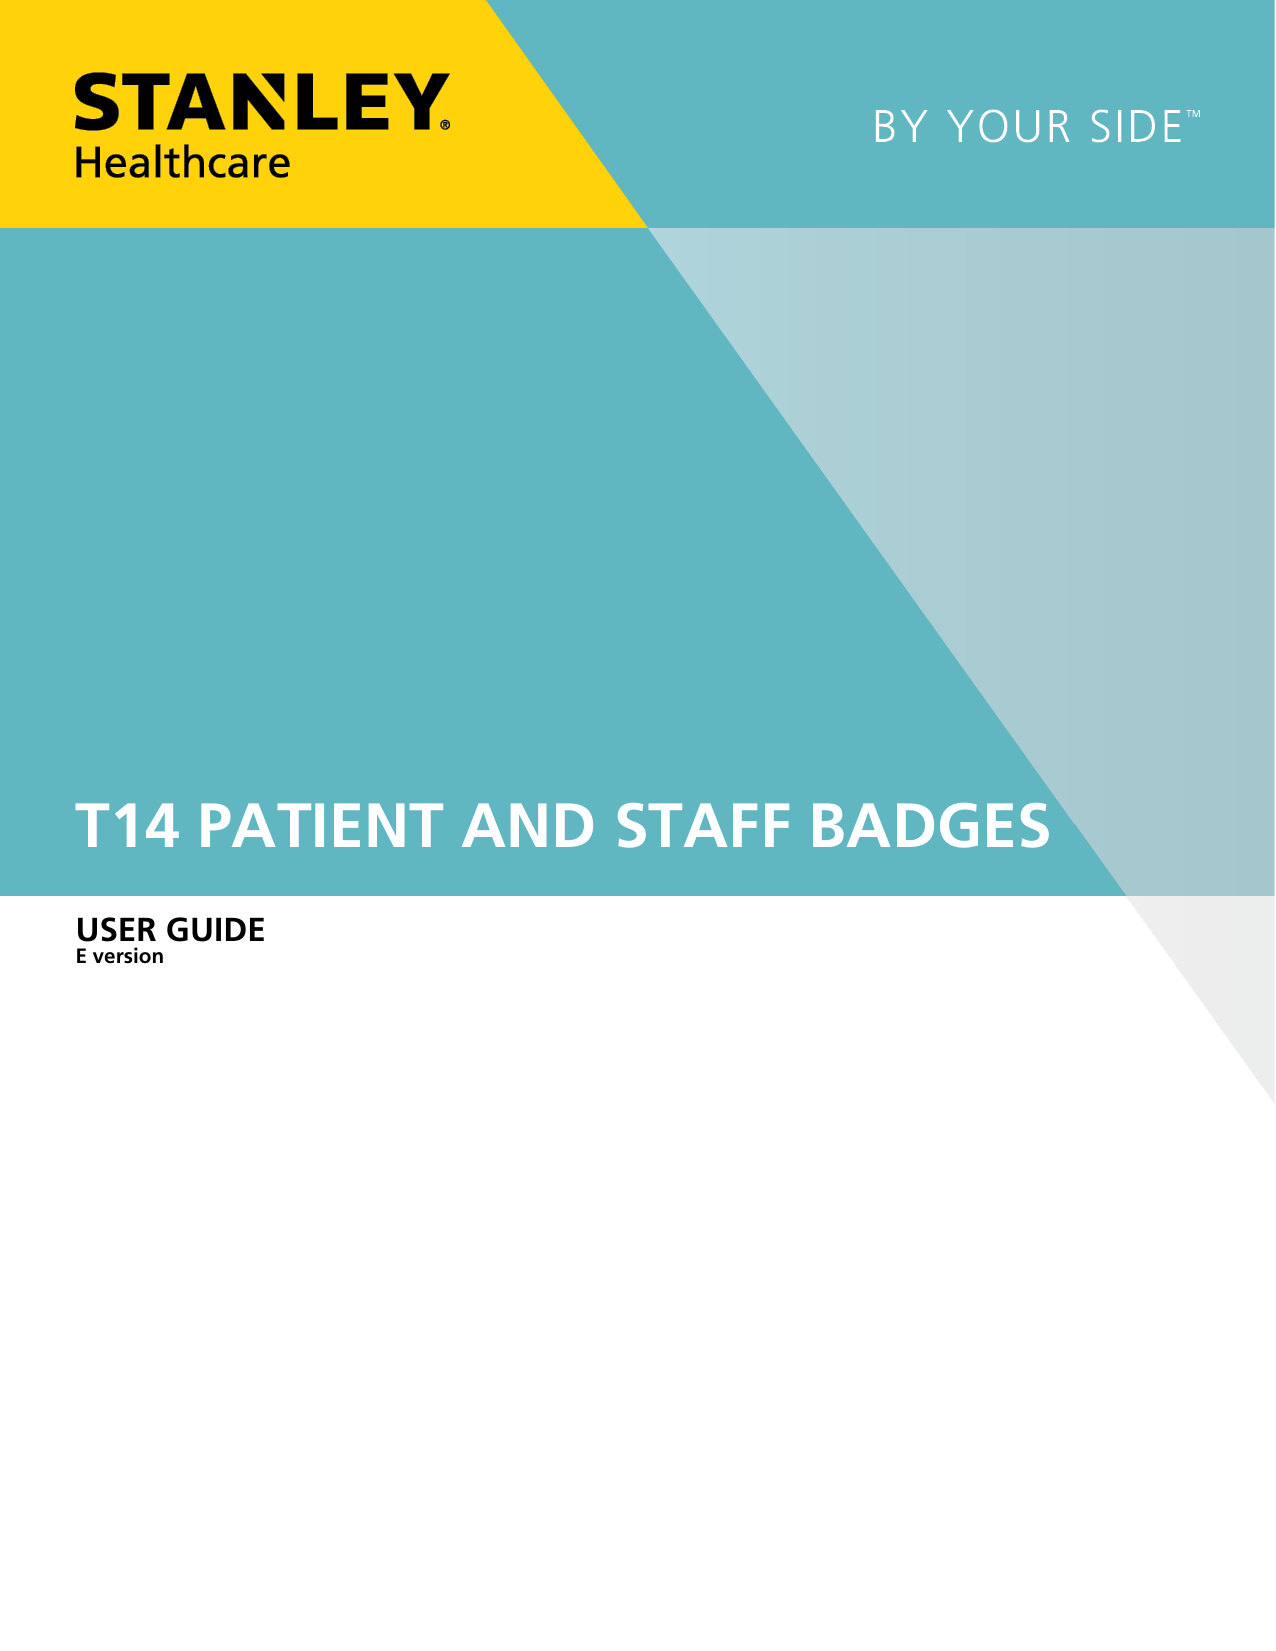                                T14 PATIENT AND STAFF BADGES USER GUIDE E version 